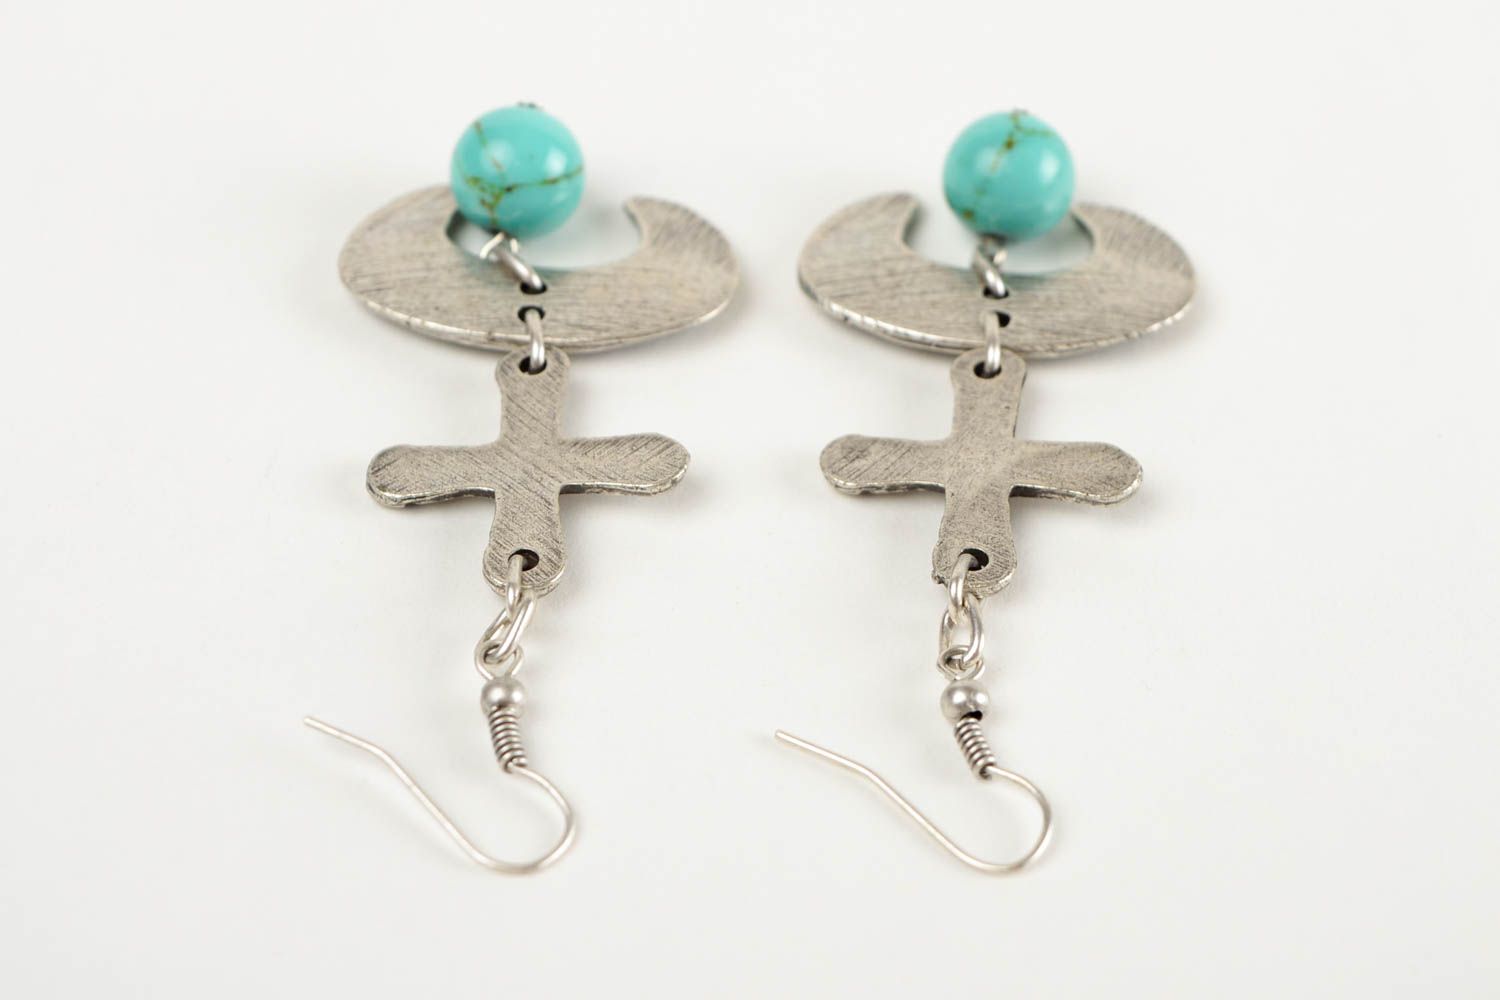 Long handcrafted earrings designer turquoise metal accessories women gift idea photo 5